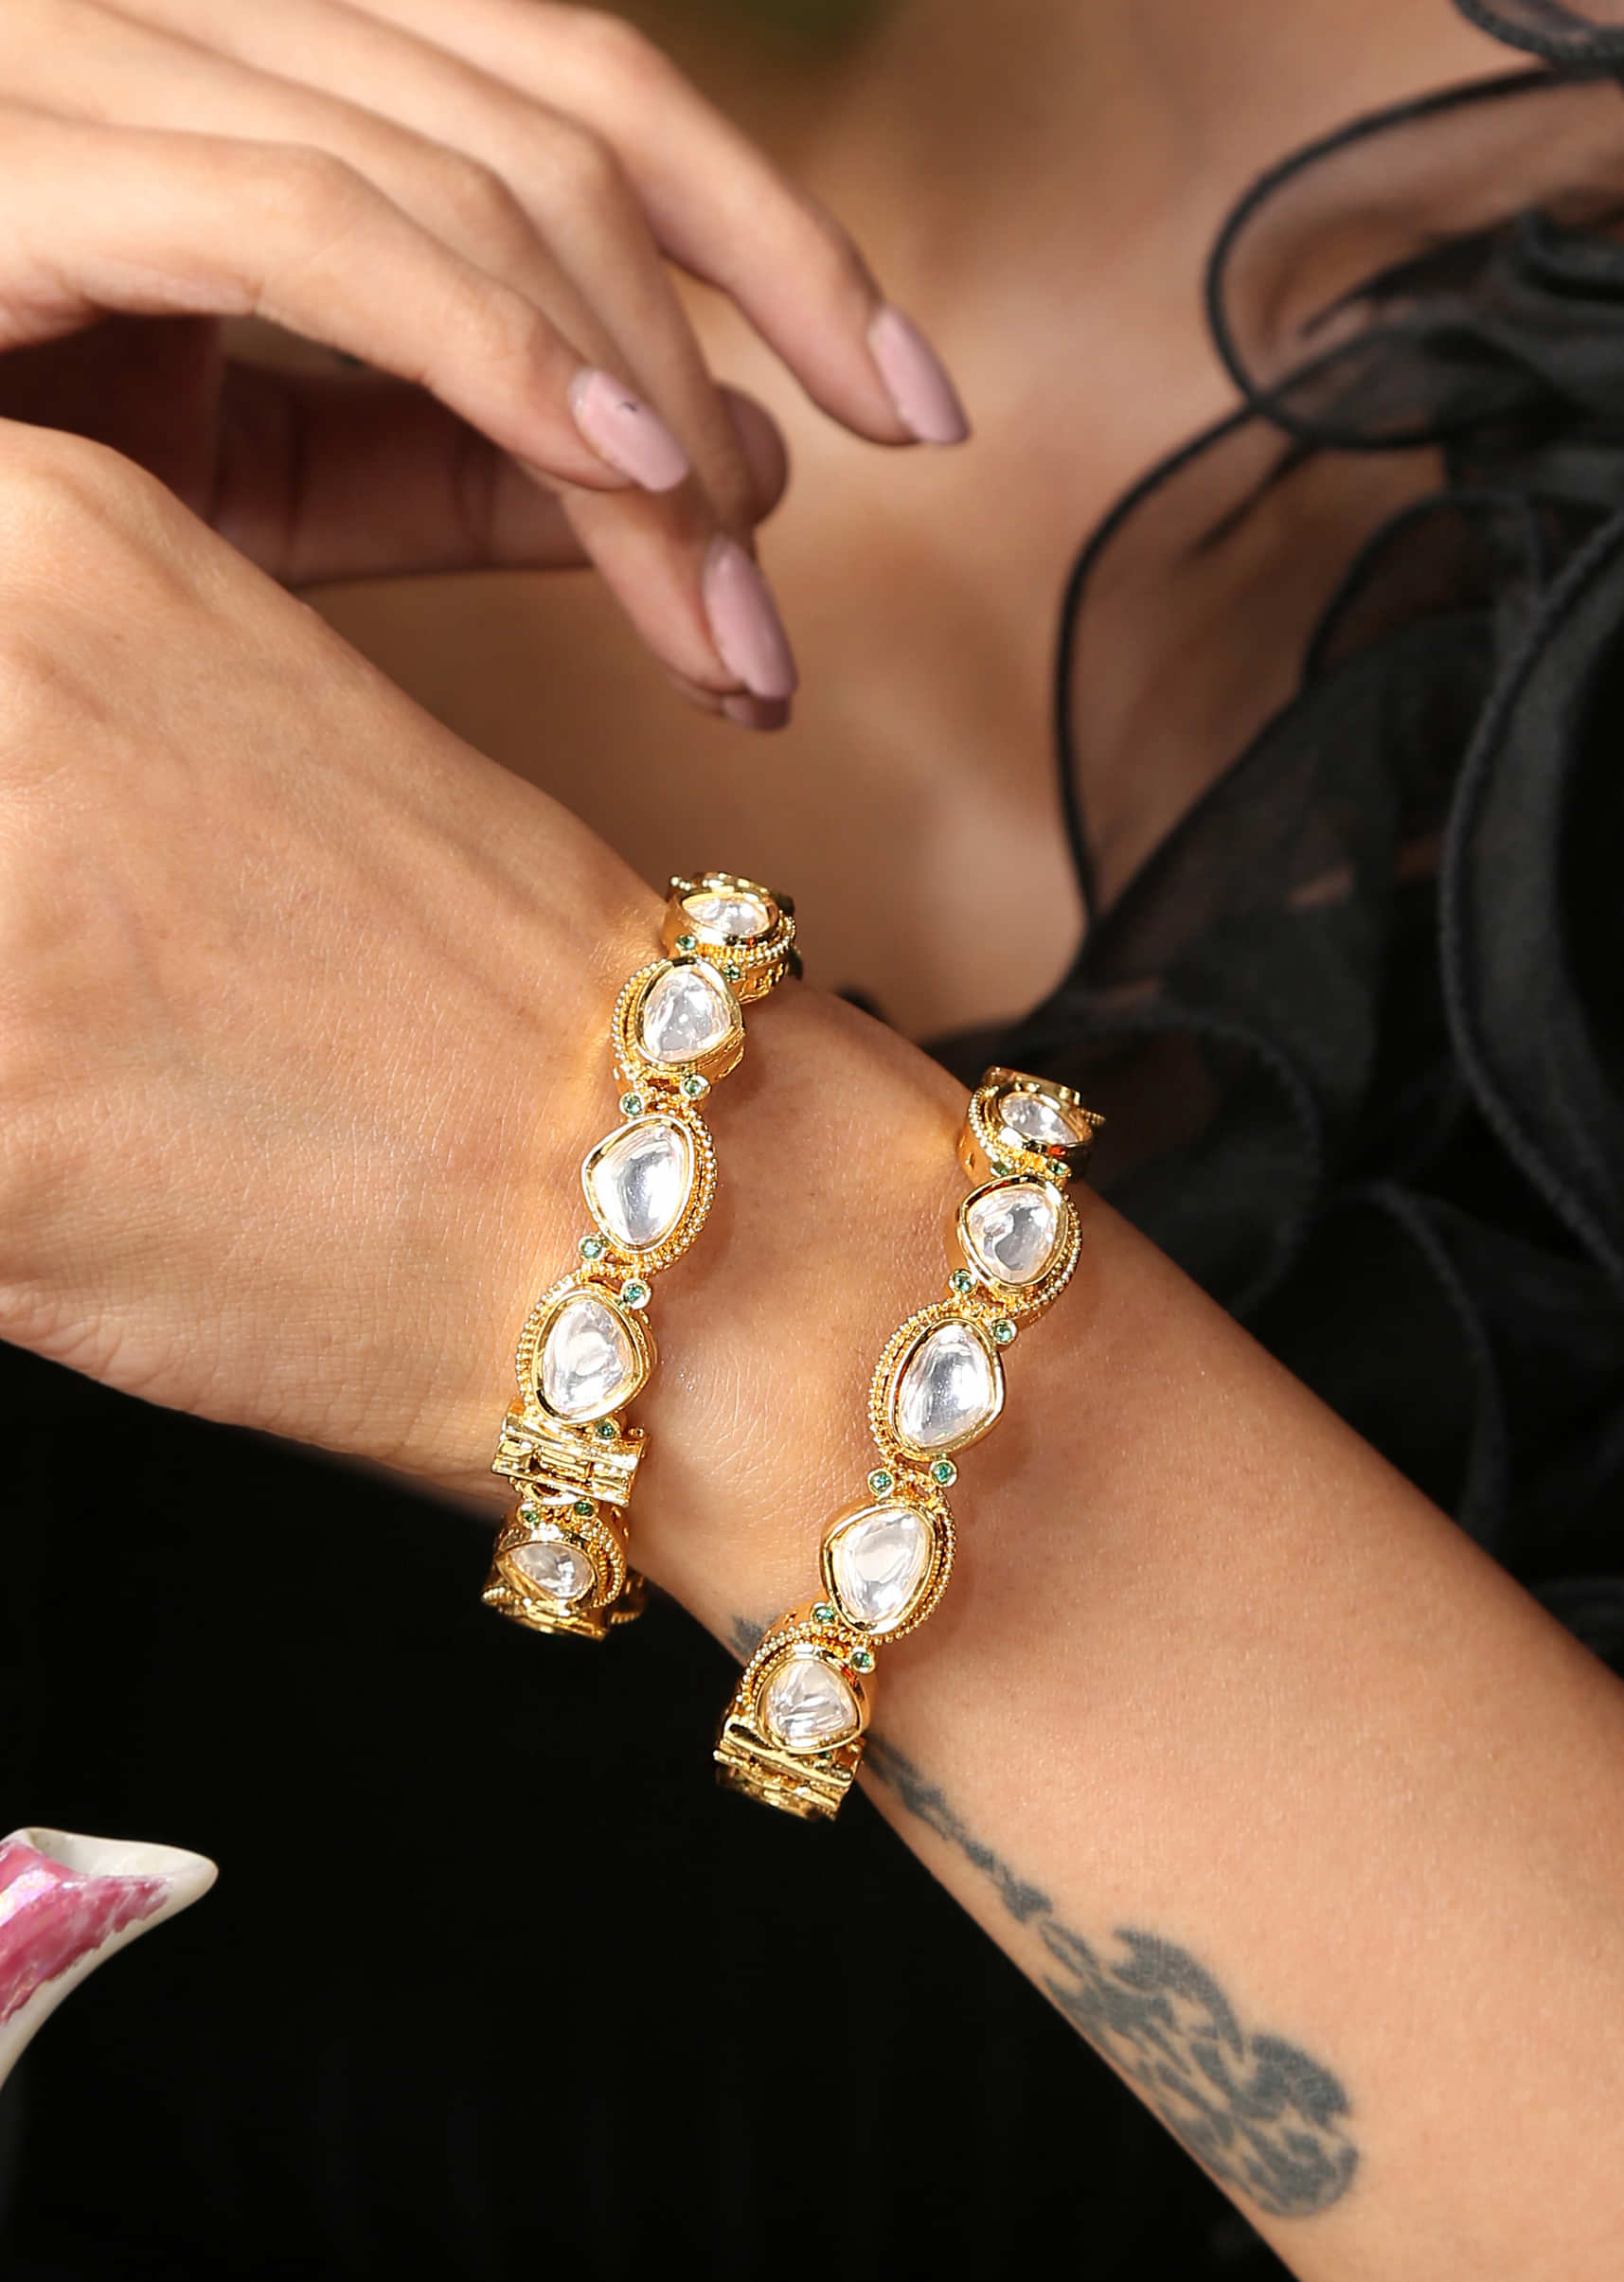 Gold Plated Victorian Polki Bangles With Tiny Cubic Zirconia On The Edges By Paisley Pop